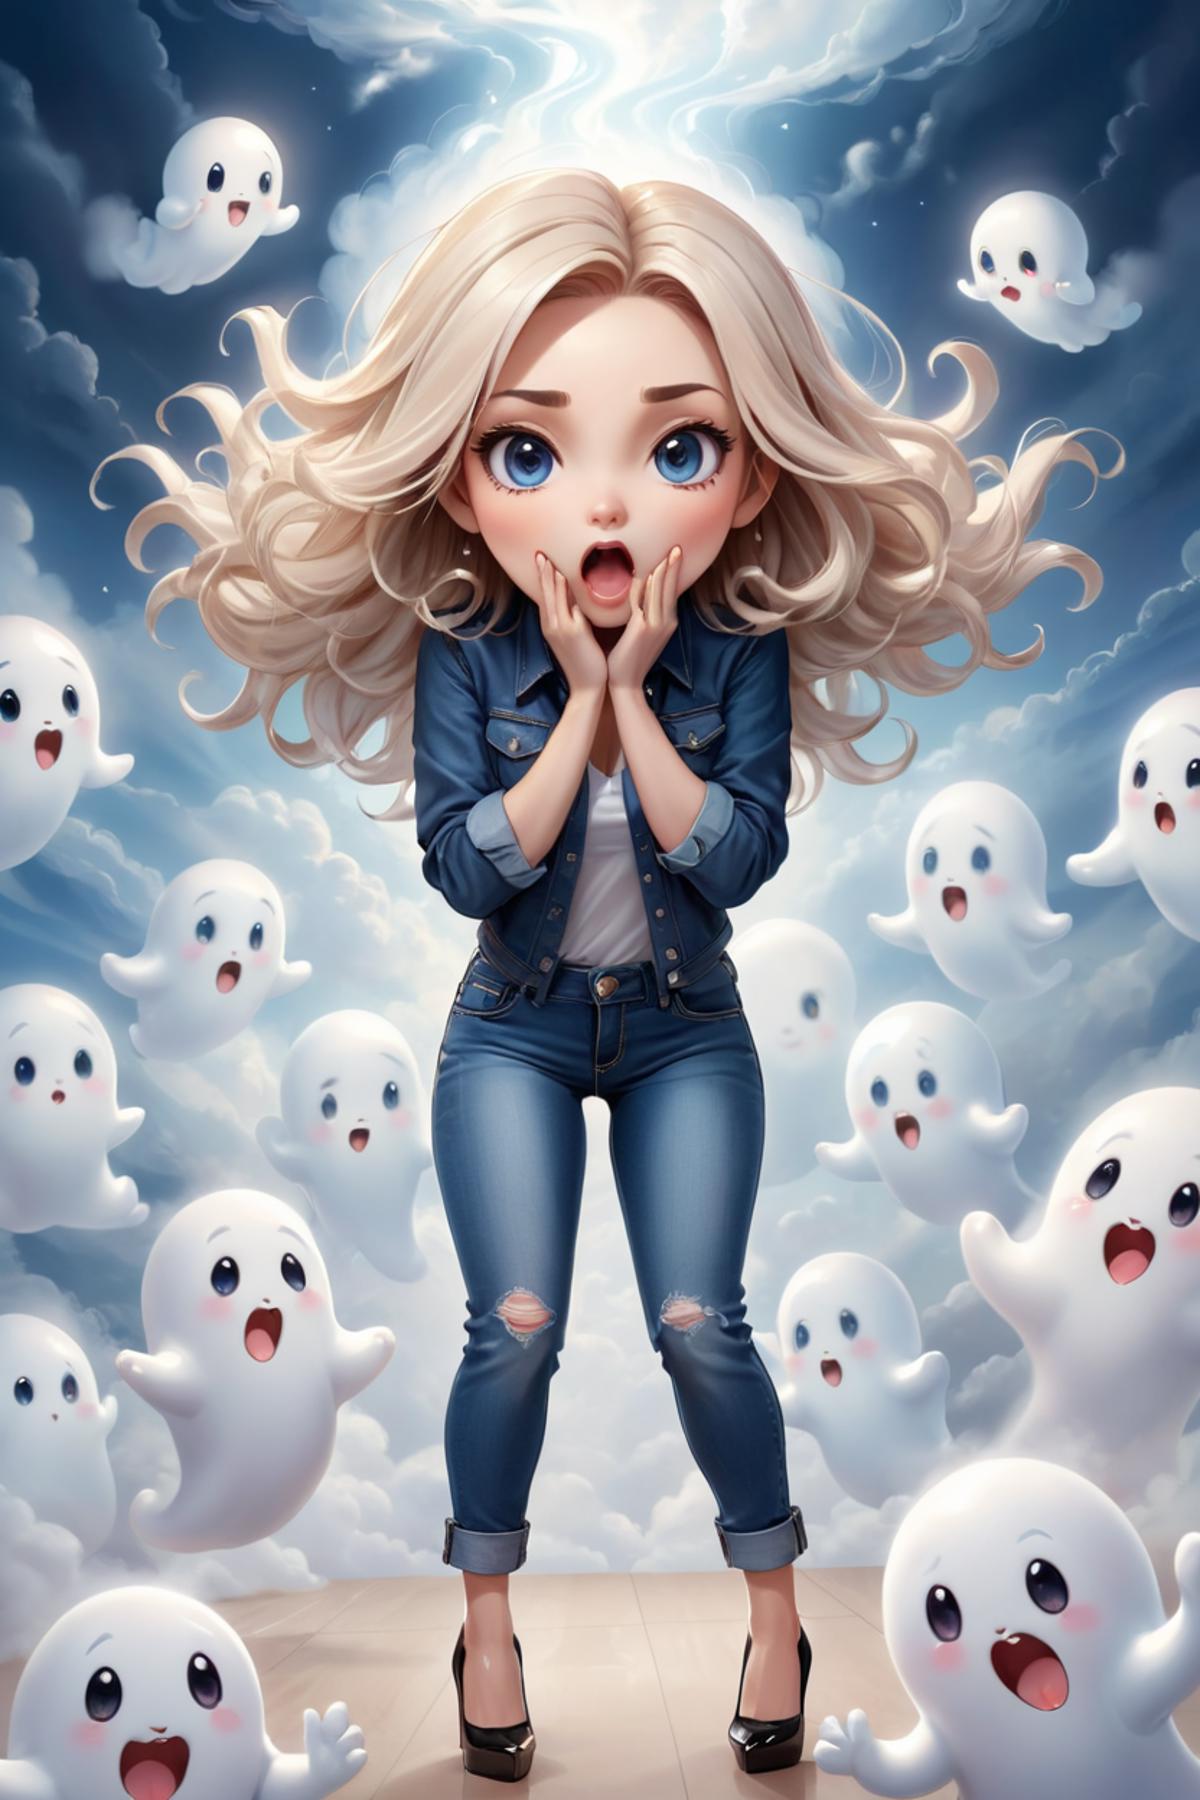 A cartoon image of a girl with a blue shirt, jeans, and short hair, surrounded by ghostly faces and white ghosts. She has an expression of surprise or shock on her face.